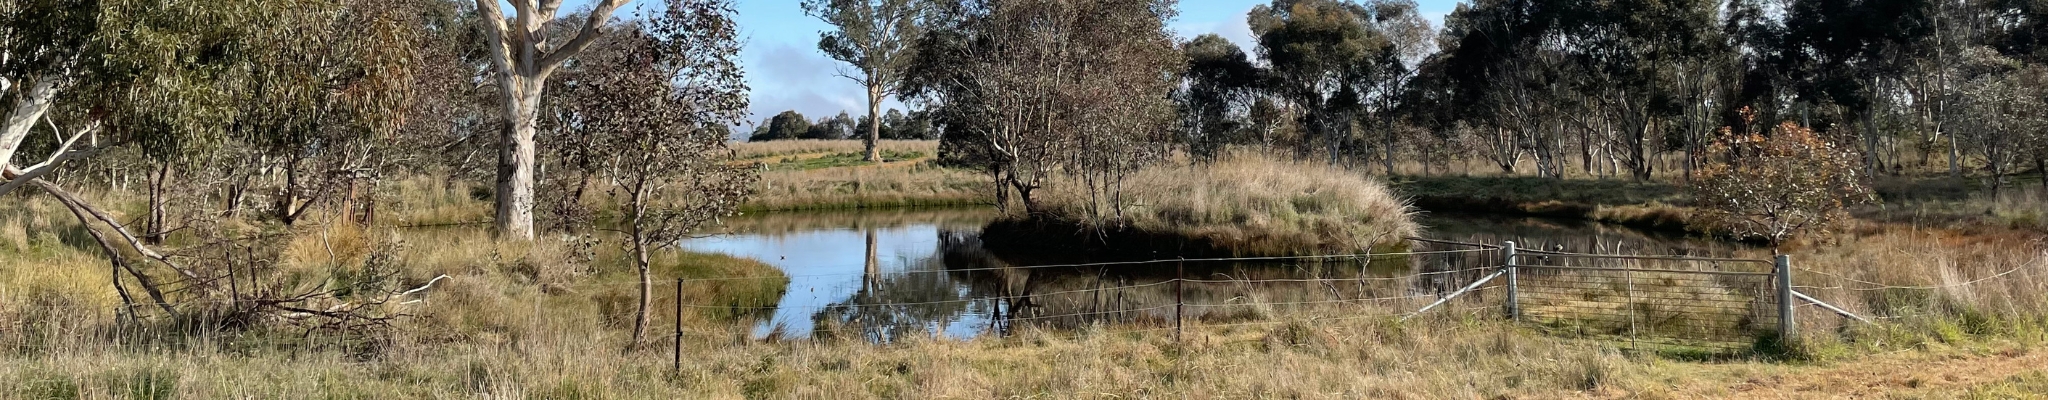 Managing farm dams in private conservation areas